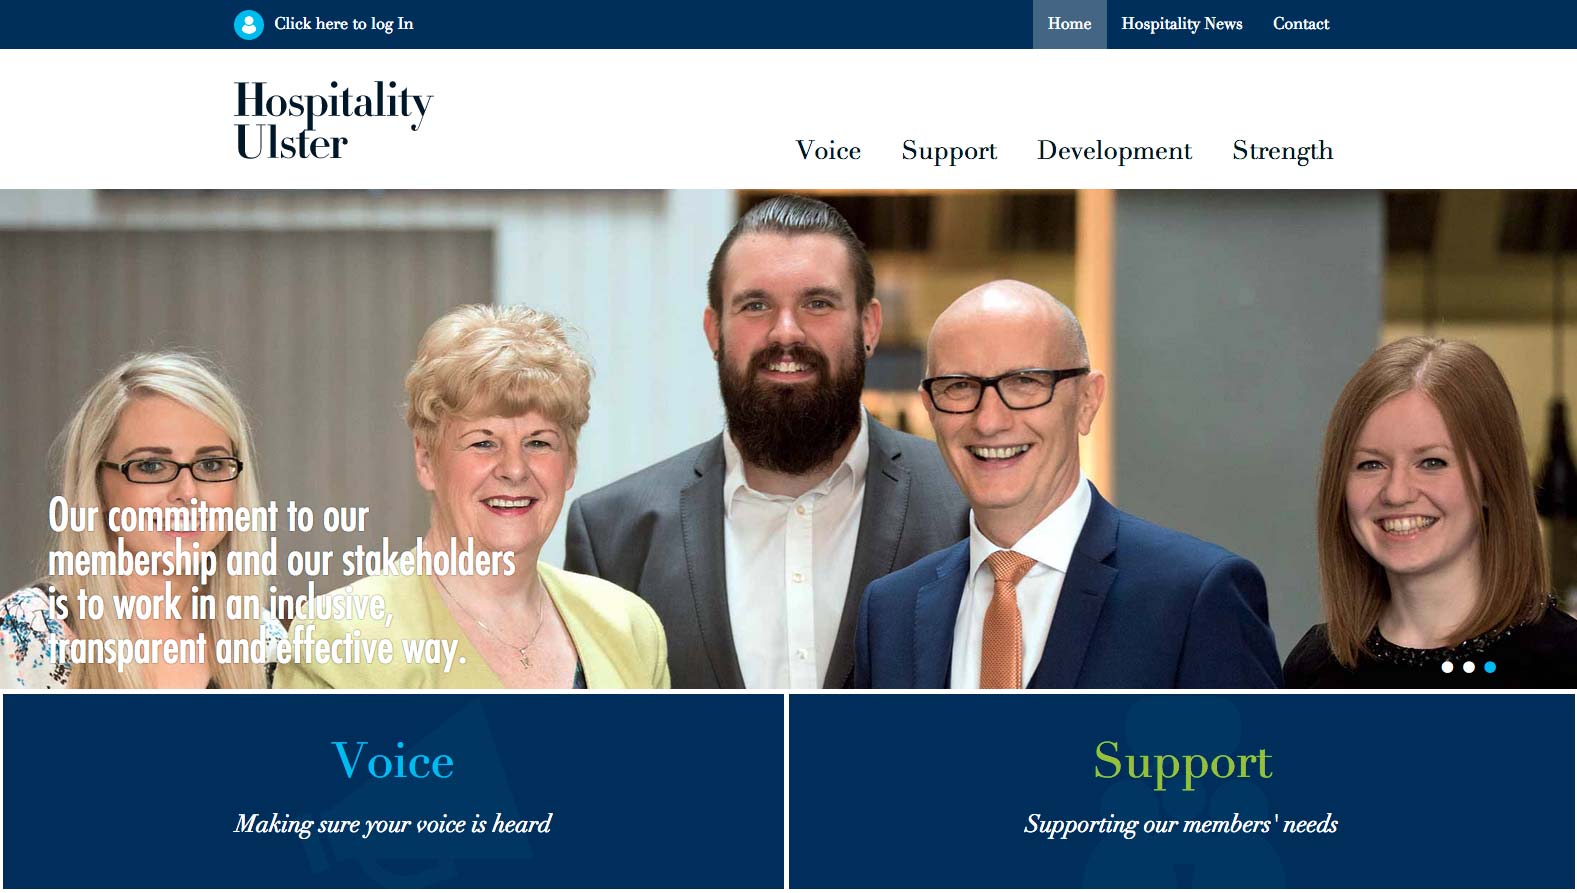 New Web Design For Hospitality Ulster